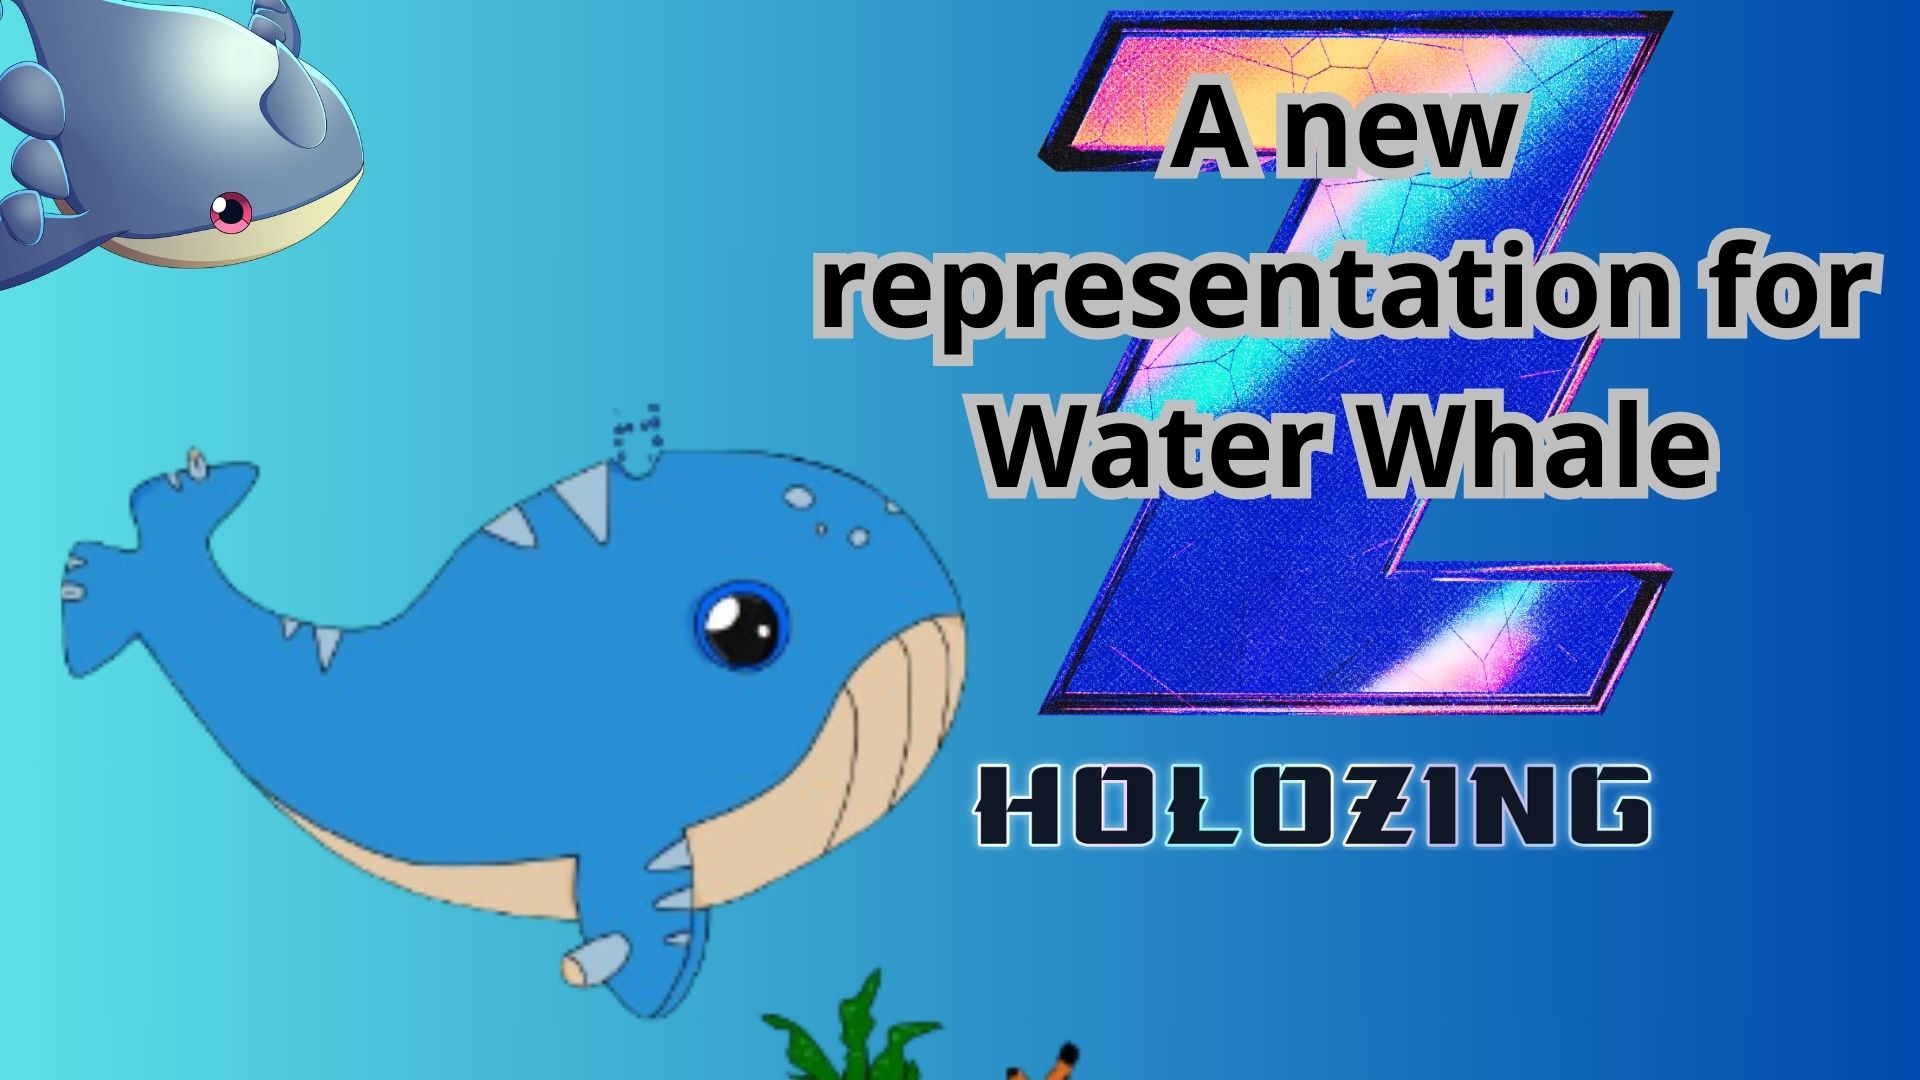 A new representation for Water Whale.jpg